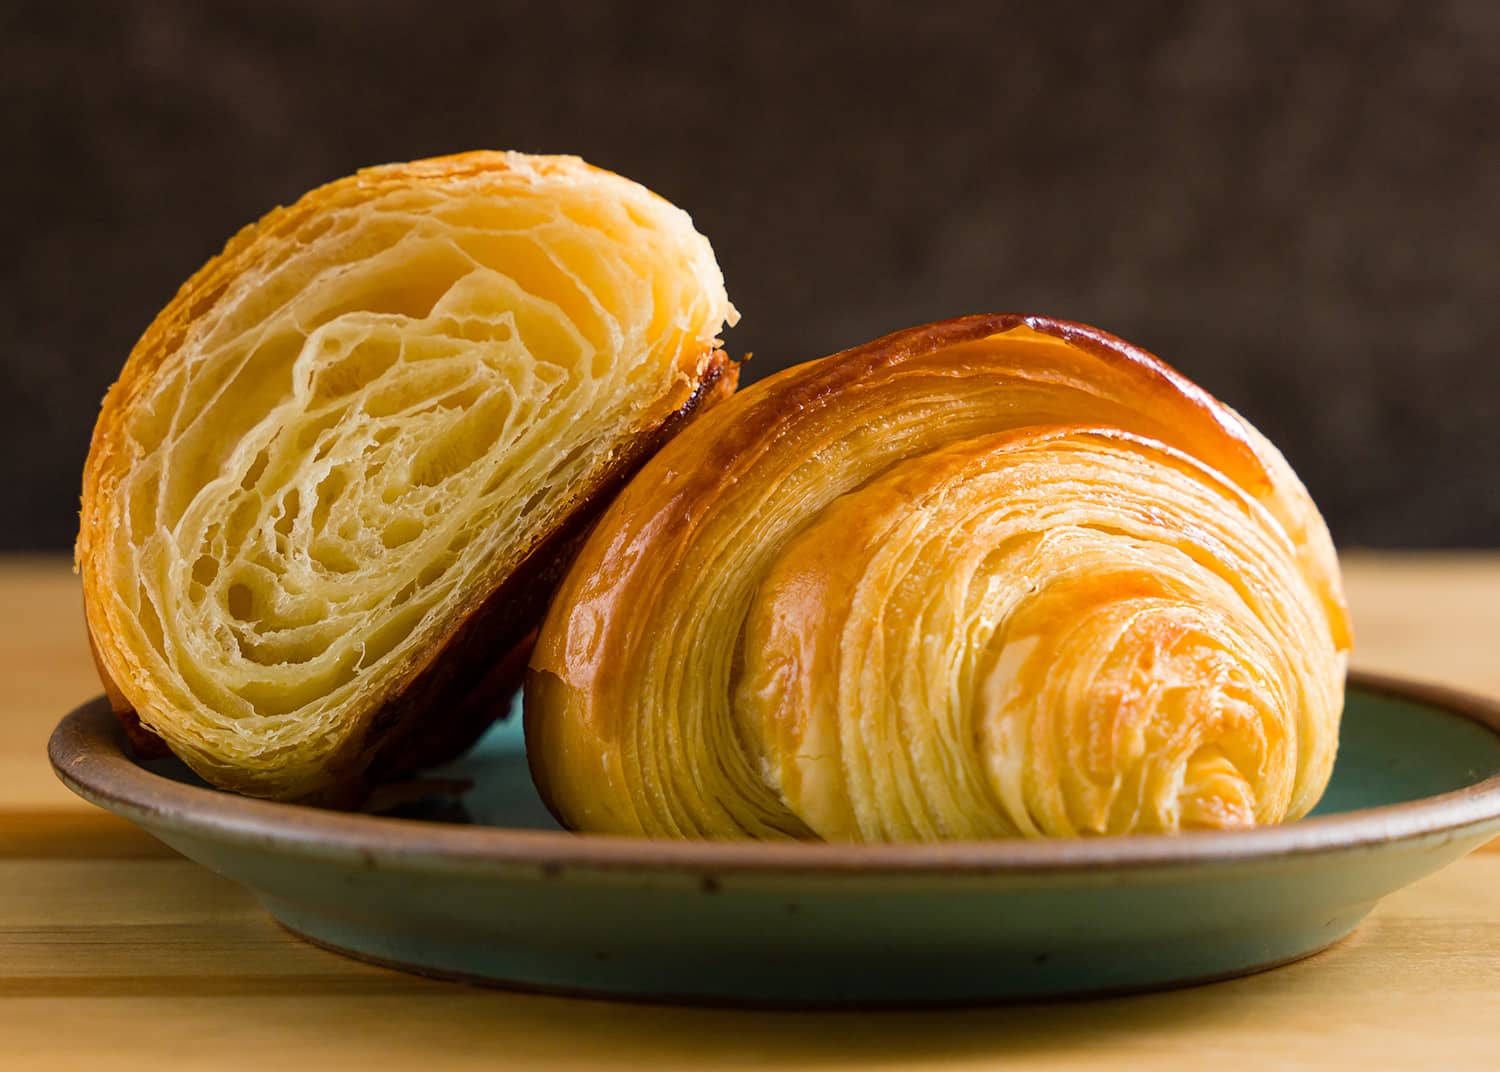 Croissants, showing layers of dough inside